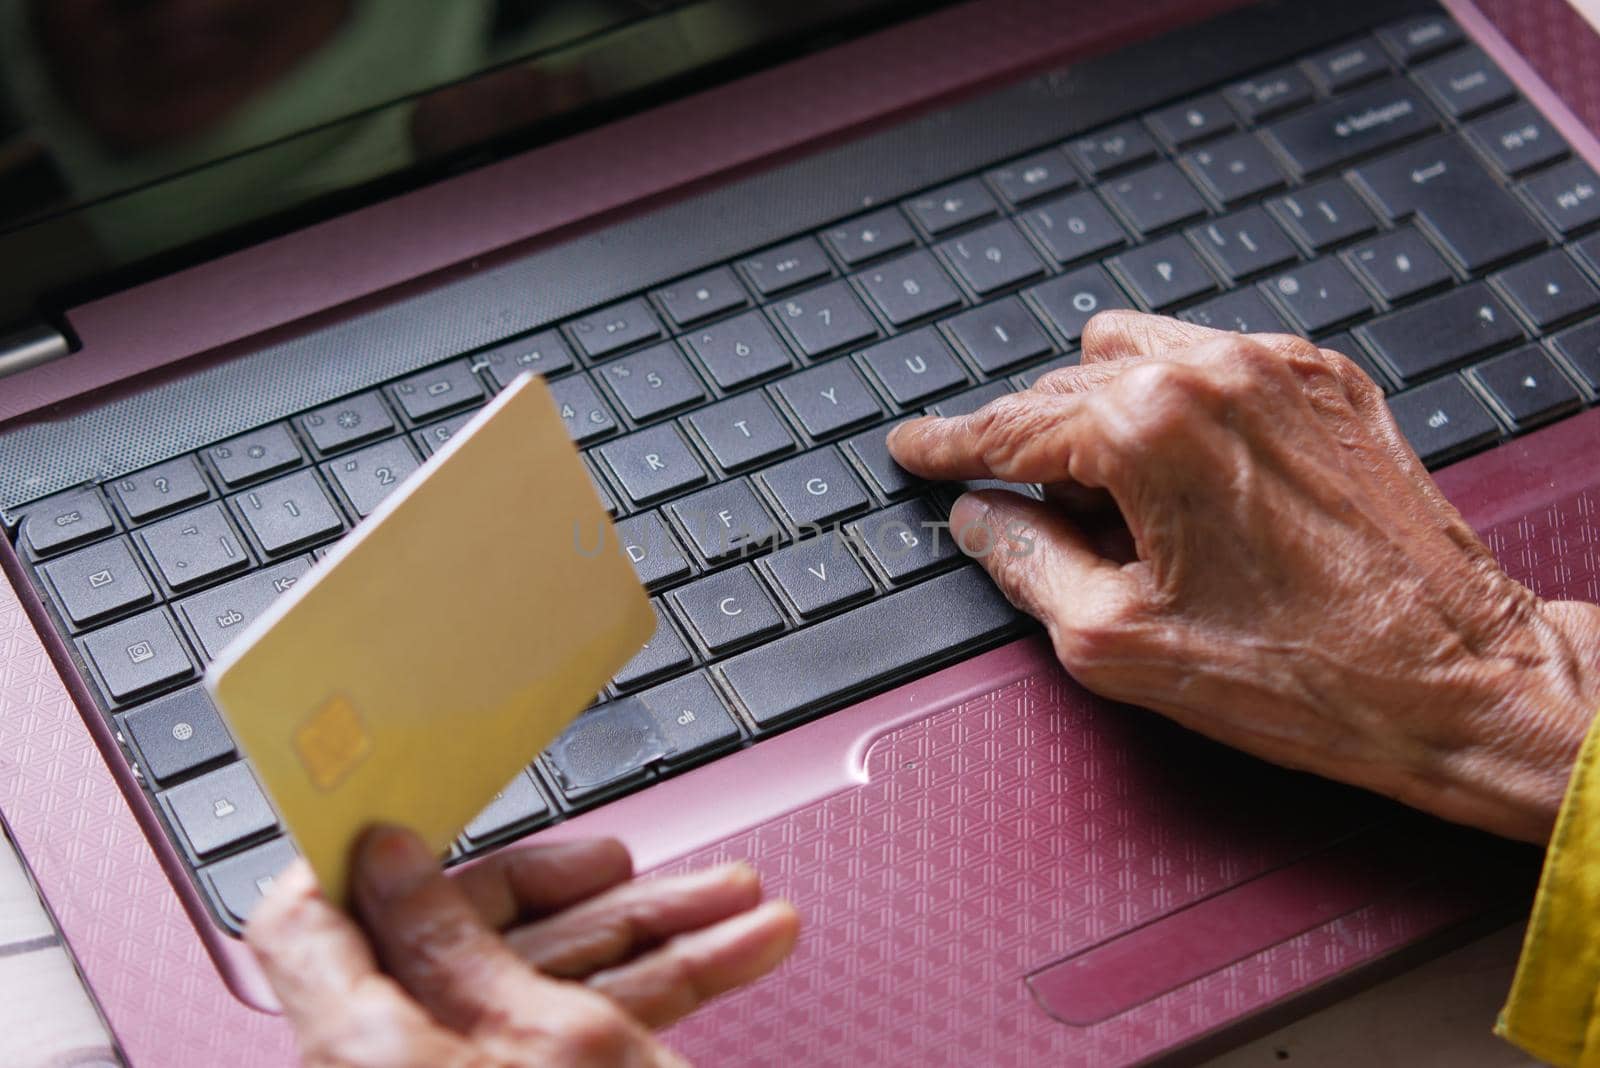 senior women hands holding credit card and using laptop shopping online by towfiq007